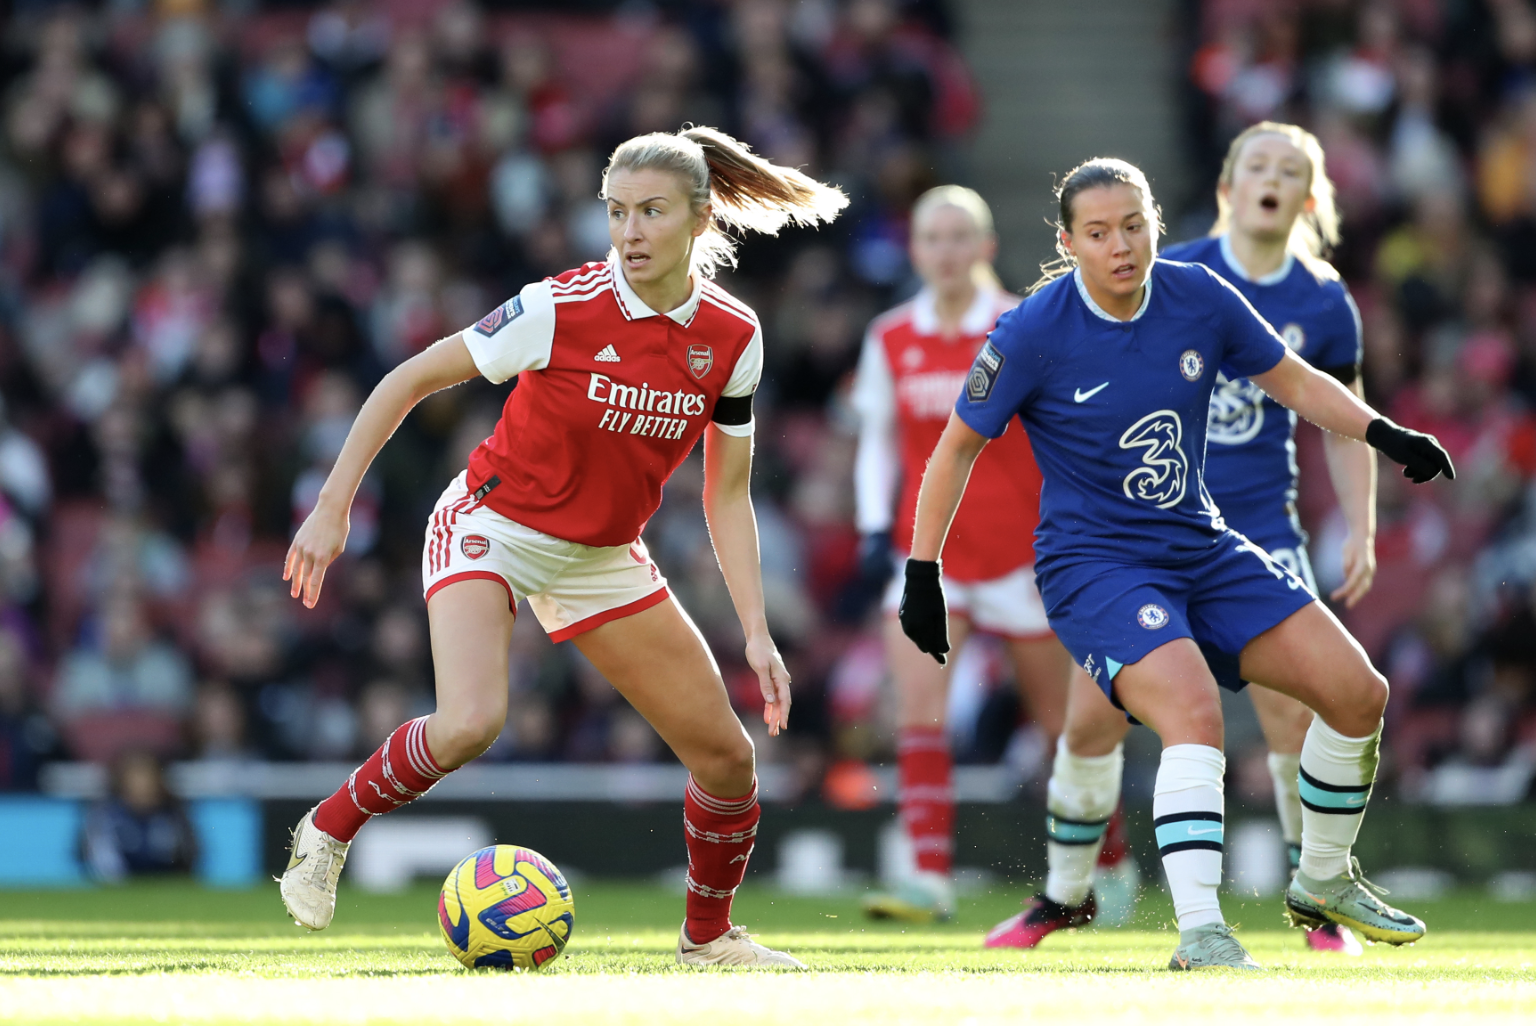 Jonas Eidevall discusses Leah Williamson return and previews WSL clash with Liverpool